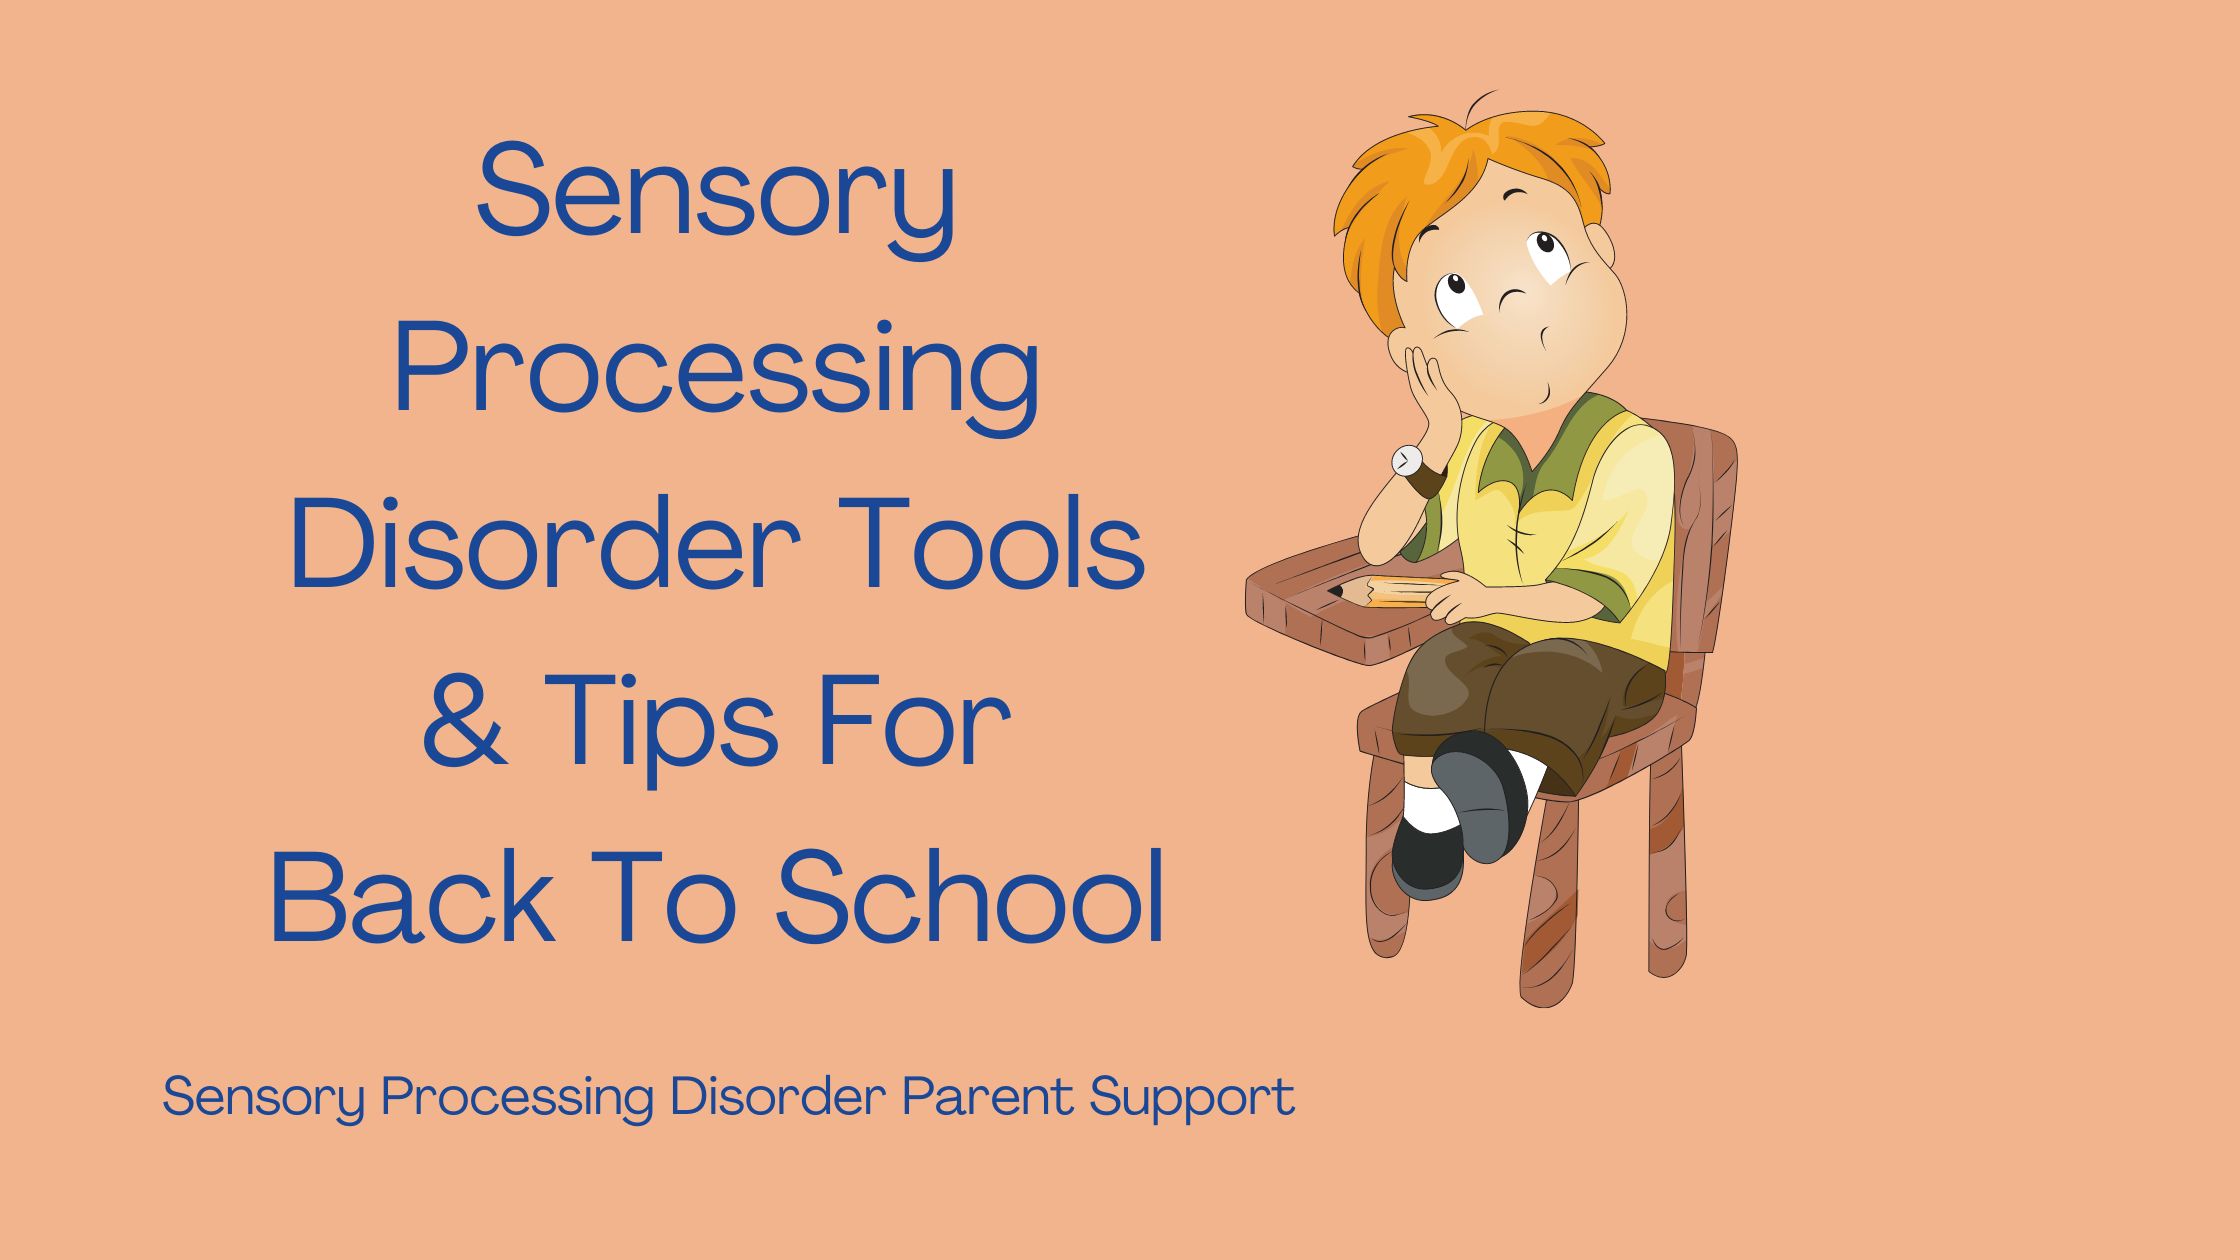 child with sensory processing disorder sitting in his classroom at his school desk sensory processing disorder tools and toys for back to school